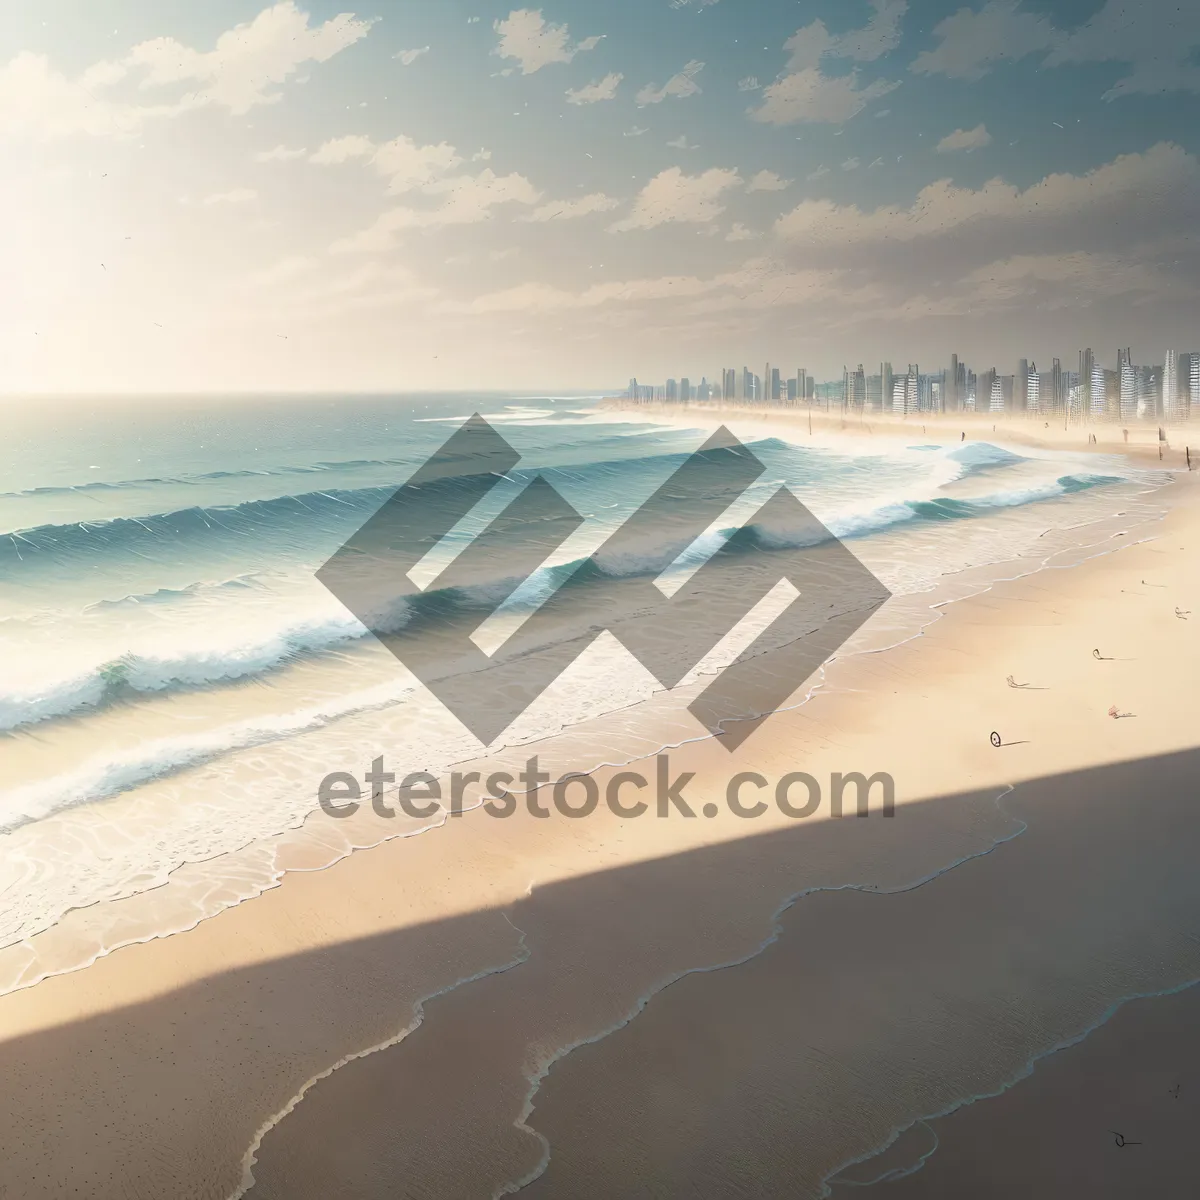 Picture of Turquoise Waterscape: Tropical Paradise on a Sandy Beach